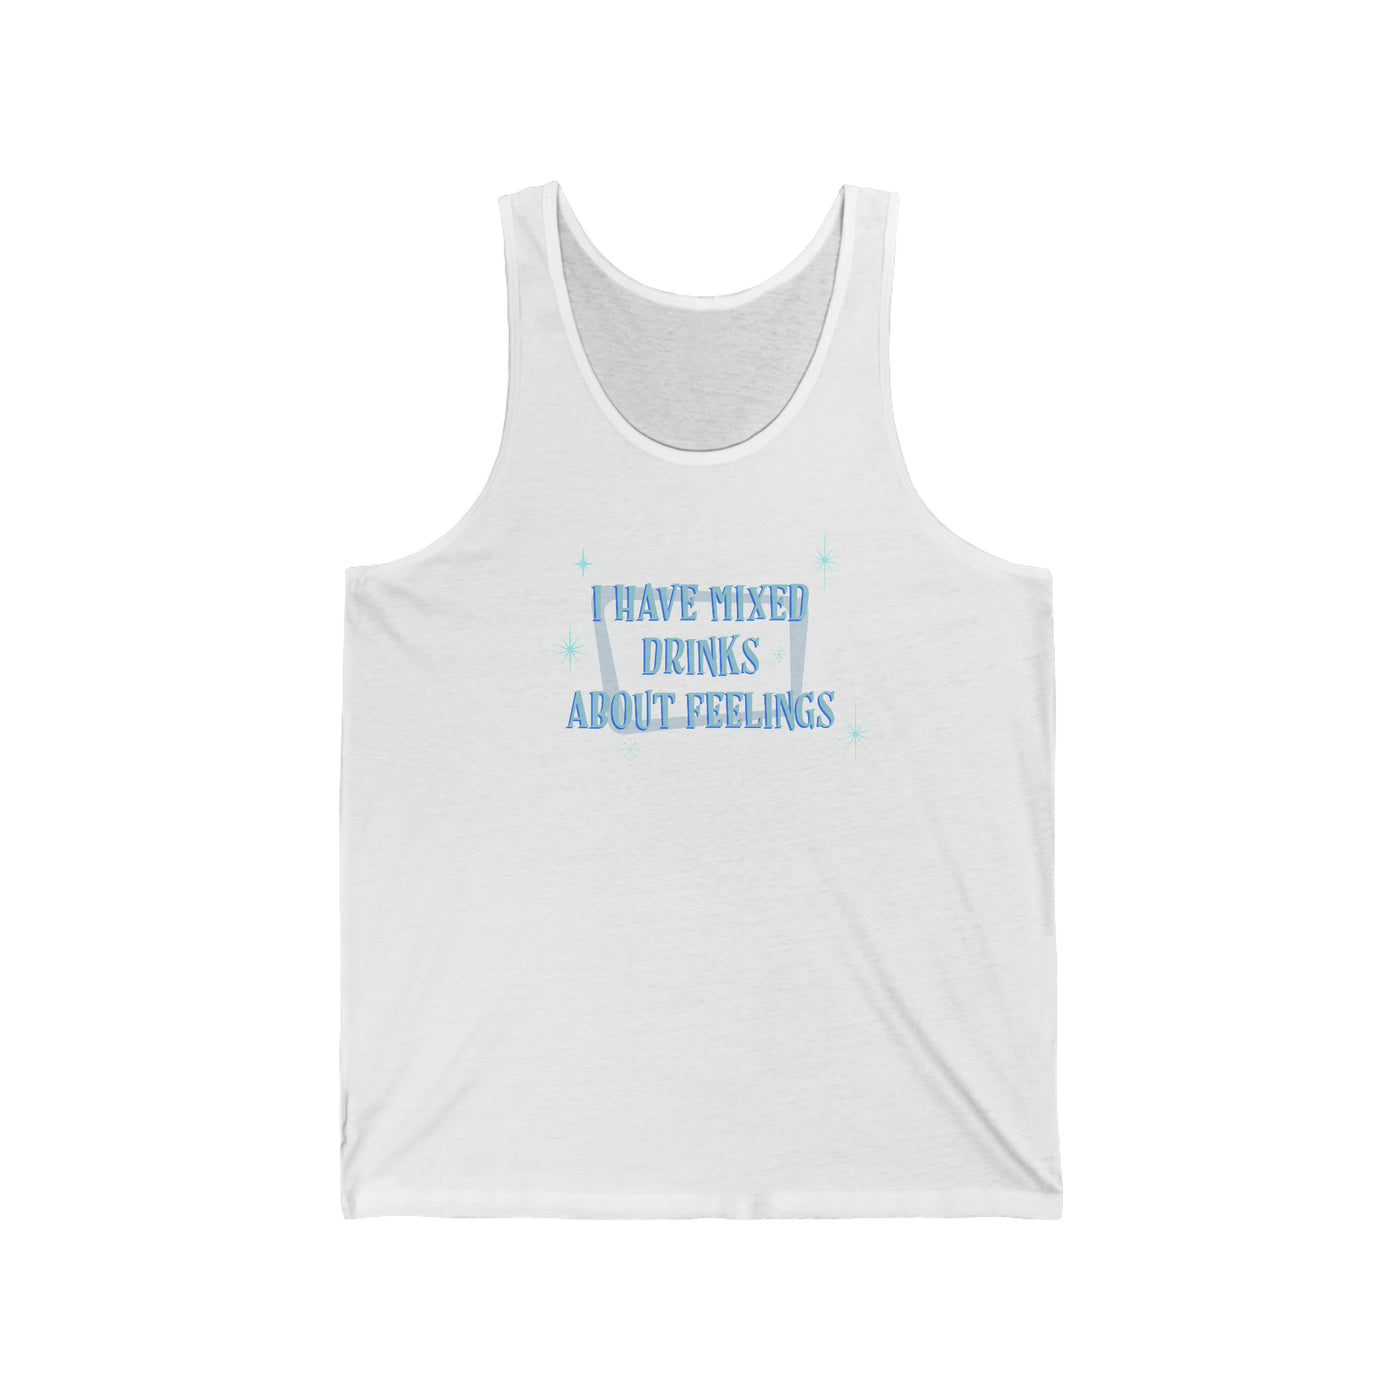 Mixed Drinks About Feelings Unisex Tank Top